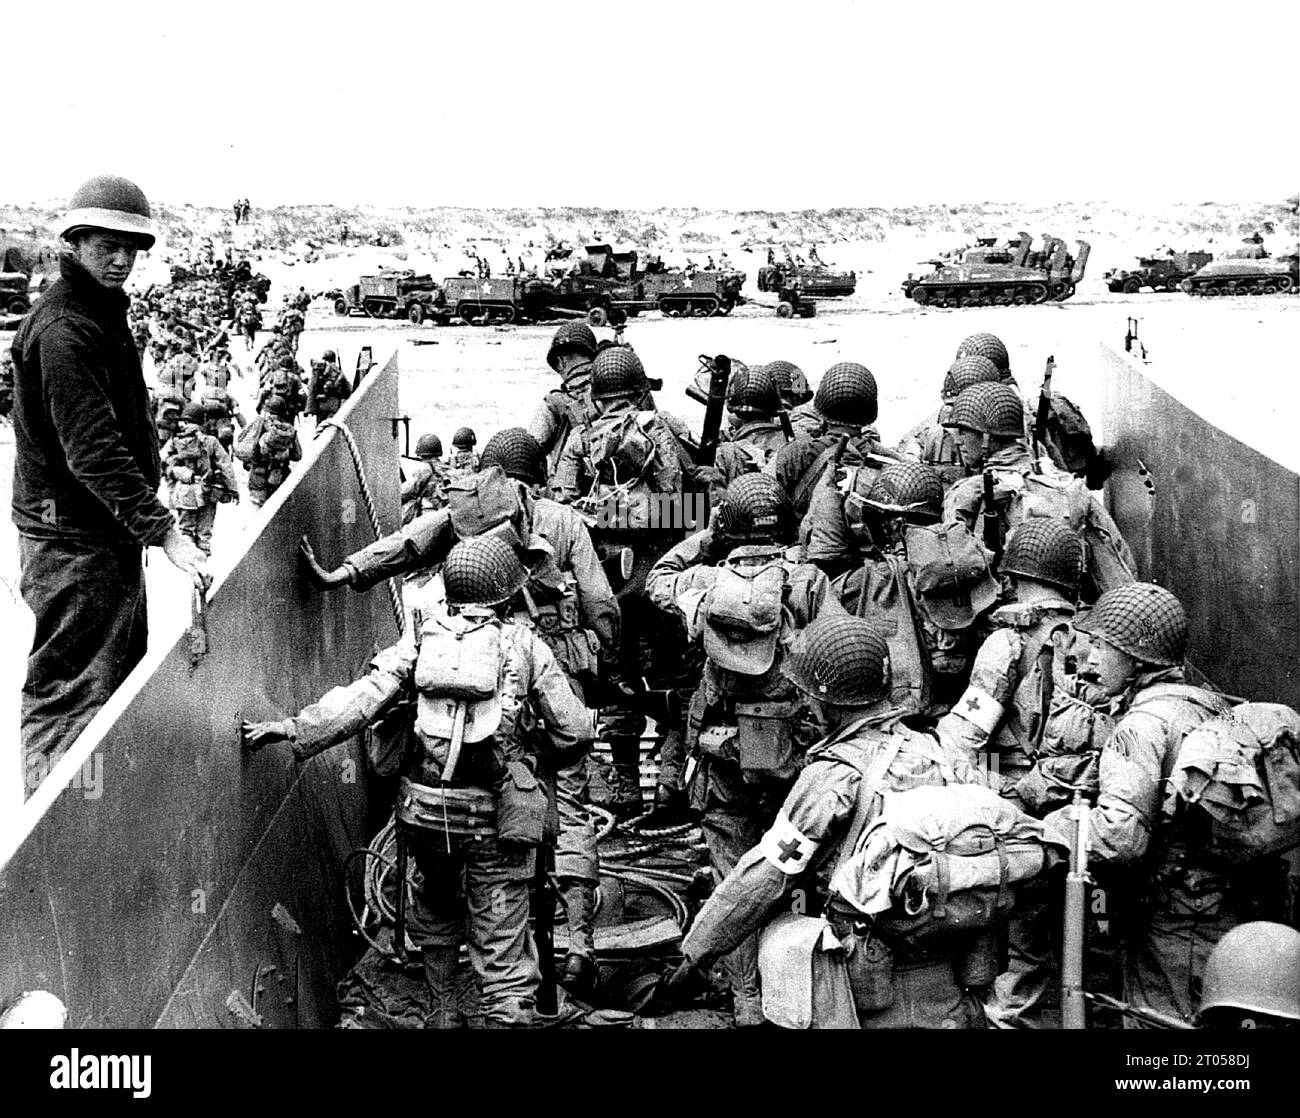 PA PHOTOS/DPA - UK USE ONLY: US Army soldiers disembark from a landing craft during the Normandy landings (D-Day) of 6th June 1944. Sherman tanks and White half-tracks can be seen drawn up on the beach. Stock Photo